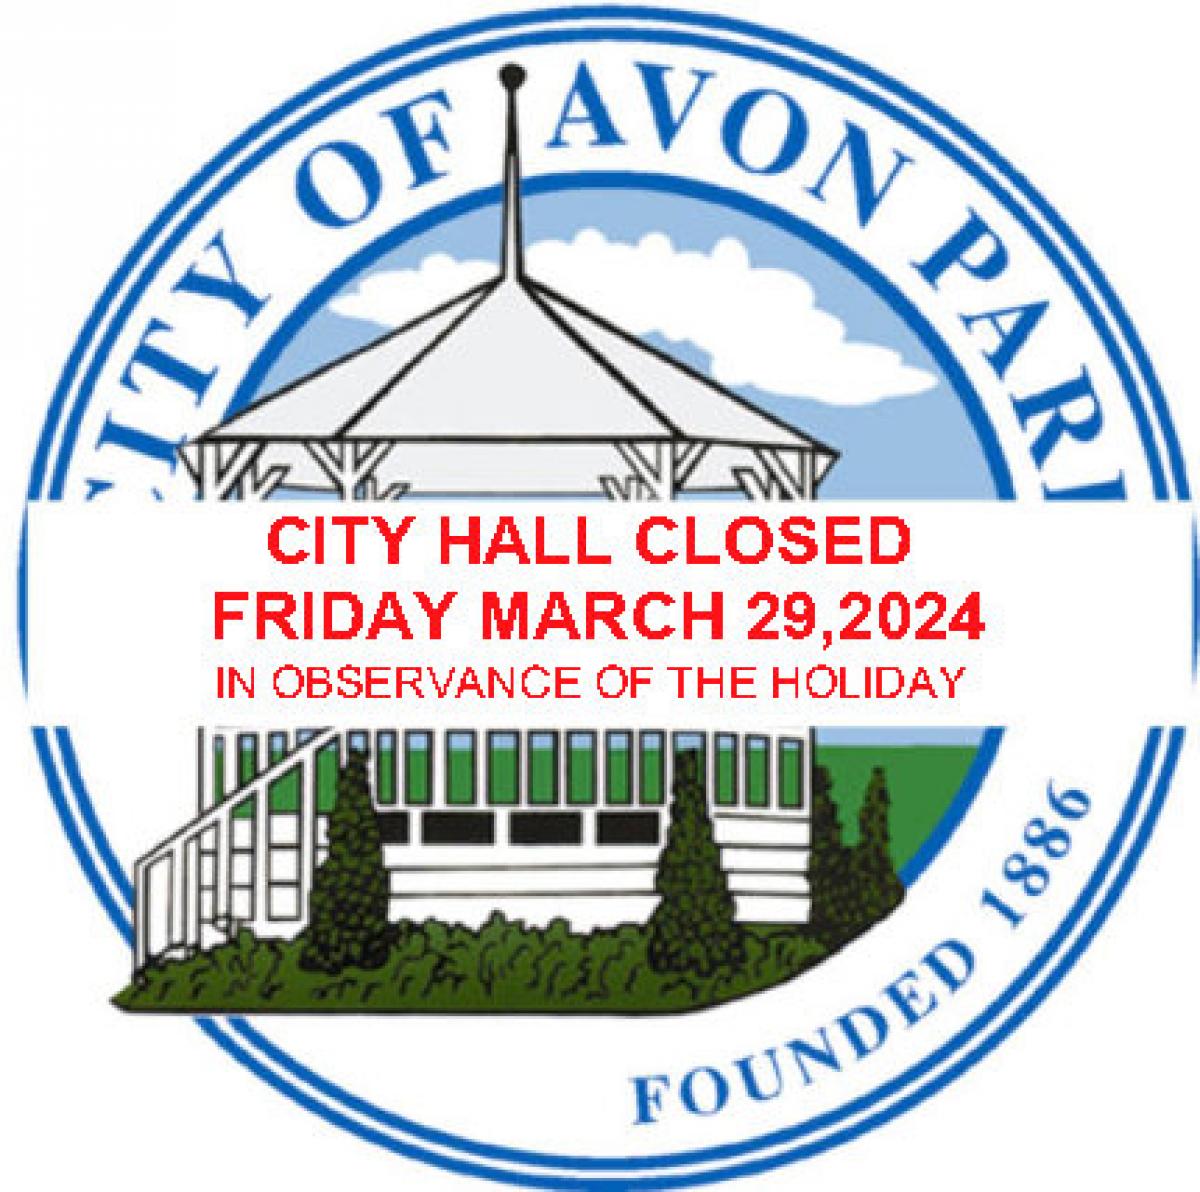 IMAGE OF CITY LOGO WITH PUBLIC NOTICE STATING CITY HALL IS CLOSED 3/29/2024 FOR THE HOLIDAY